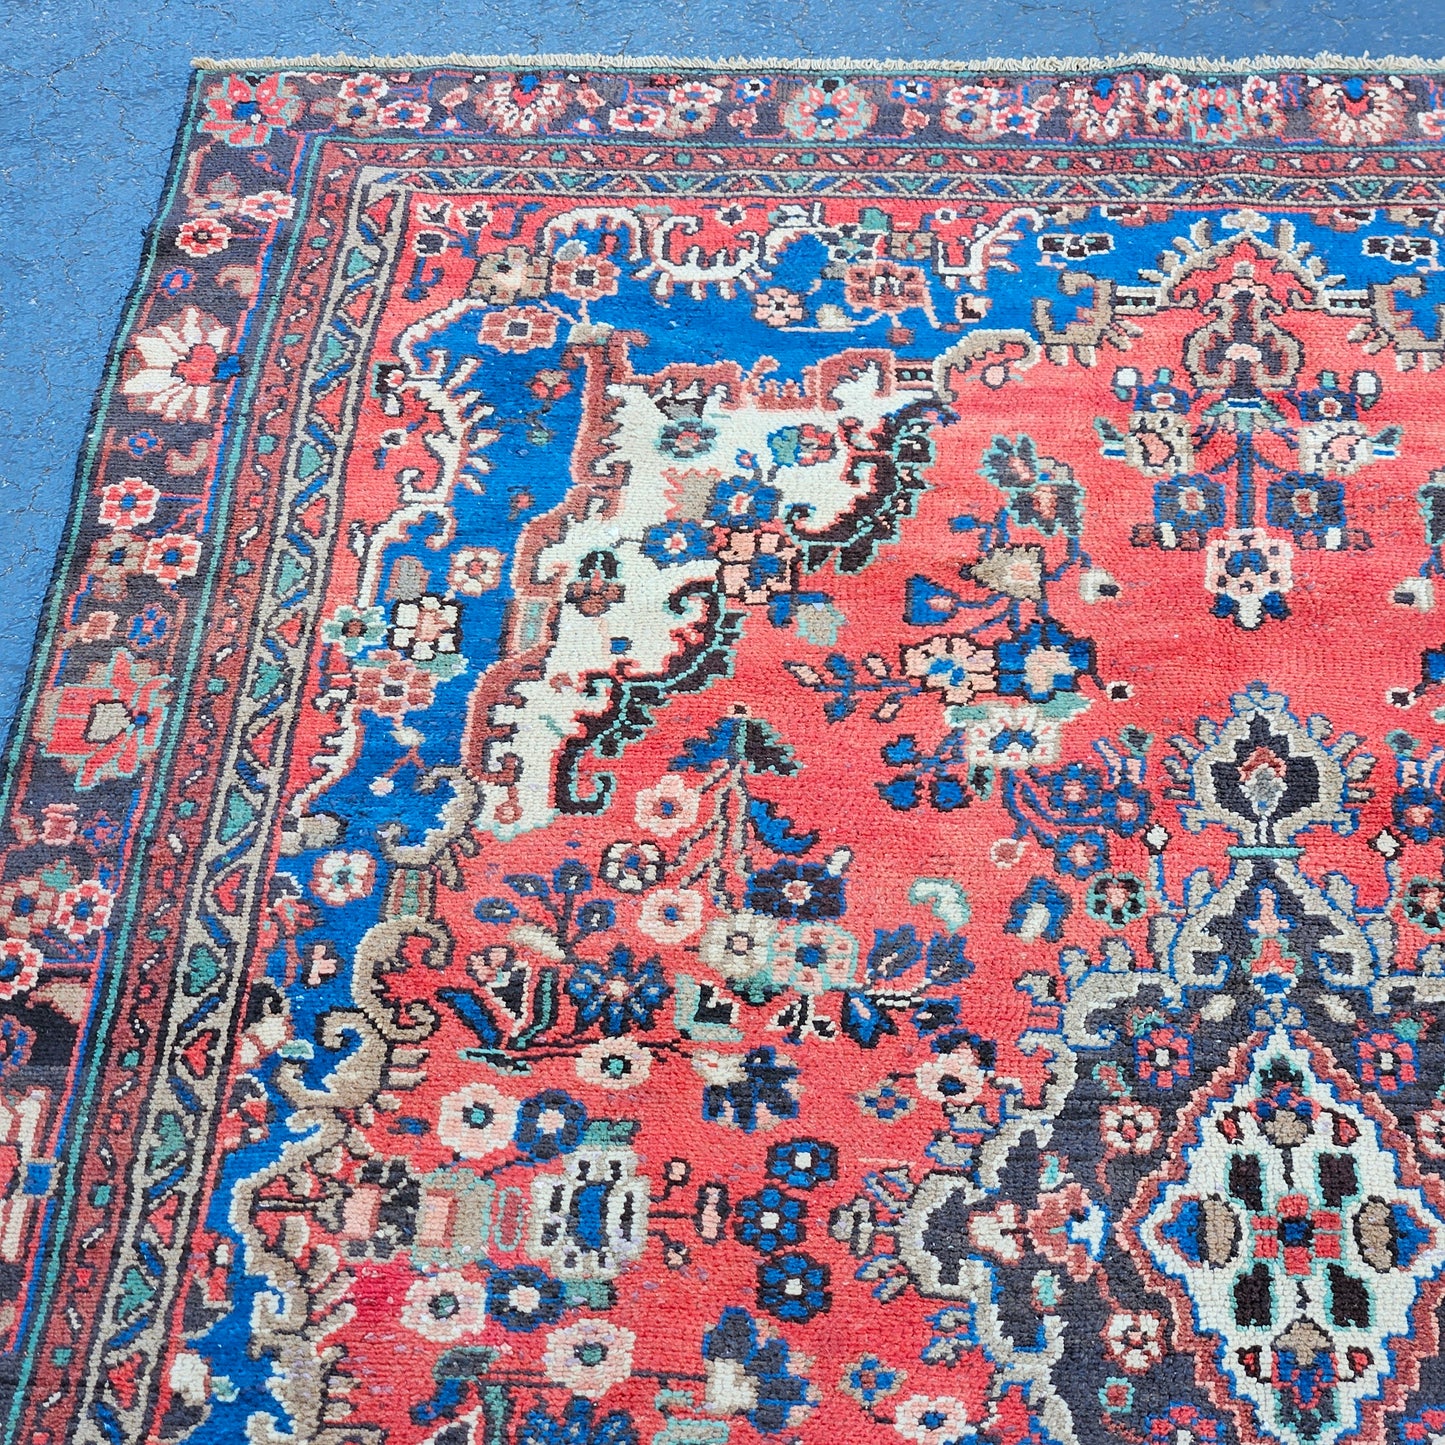 Antique 100% Wool Hand Knotted Red Rug / Carpet - 6' 4" x 9' 2"